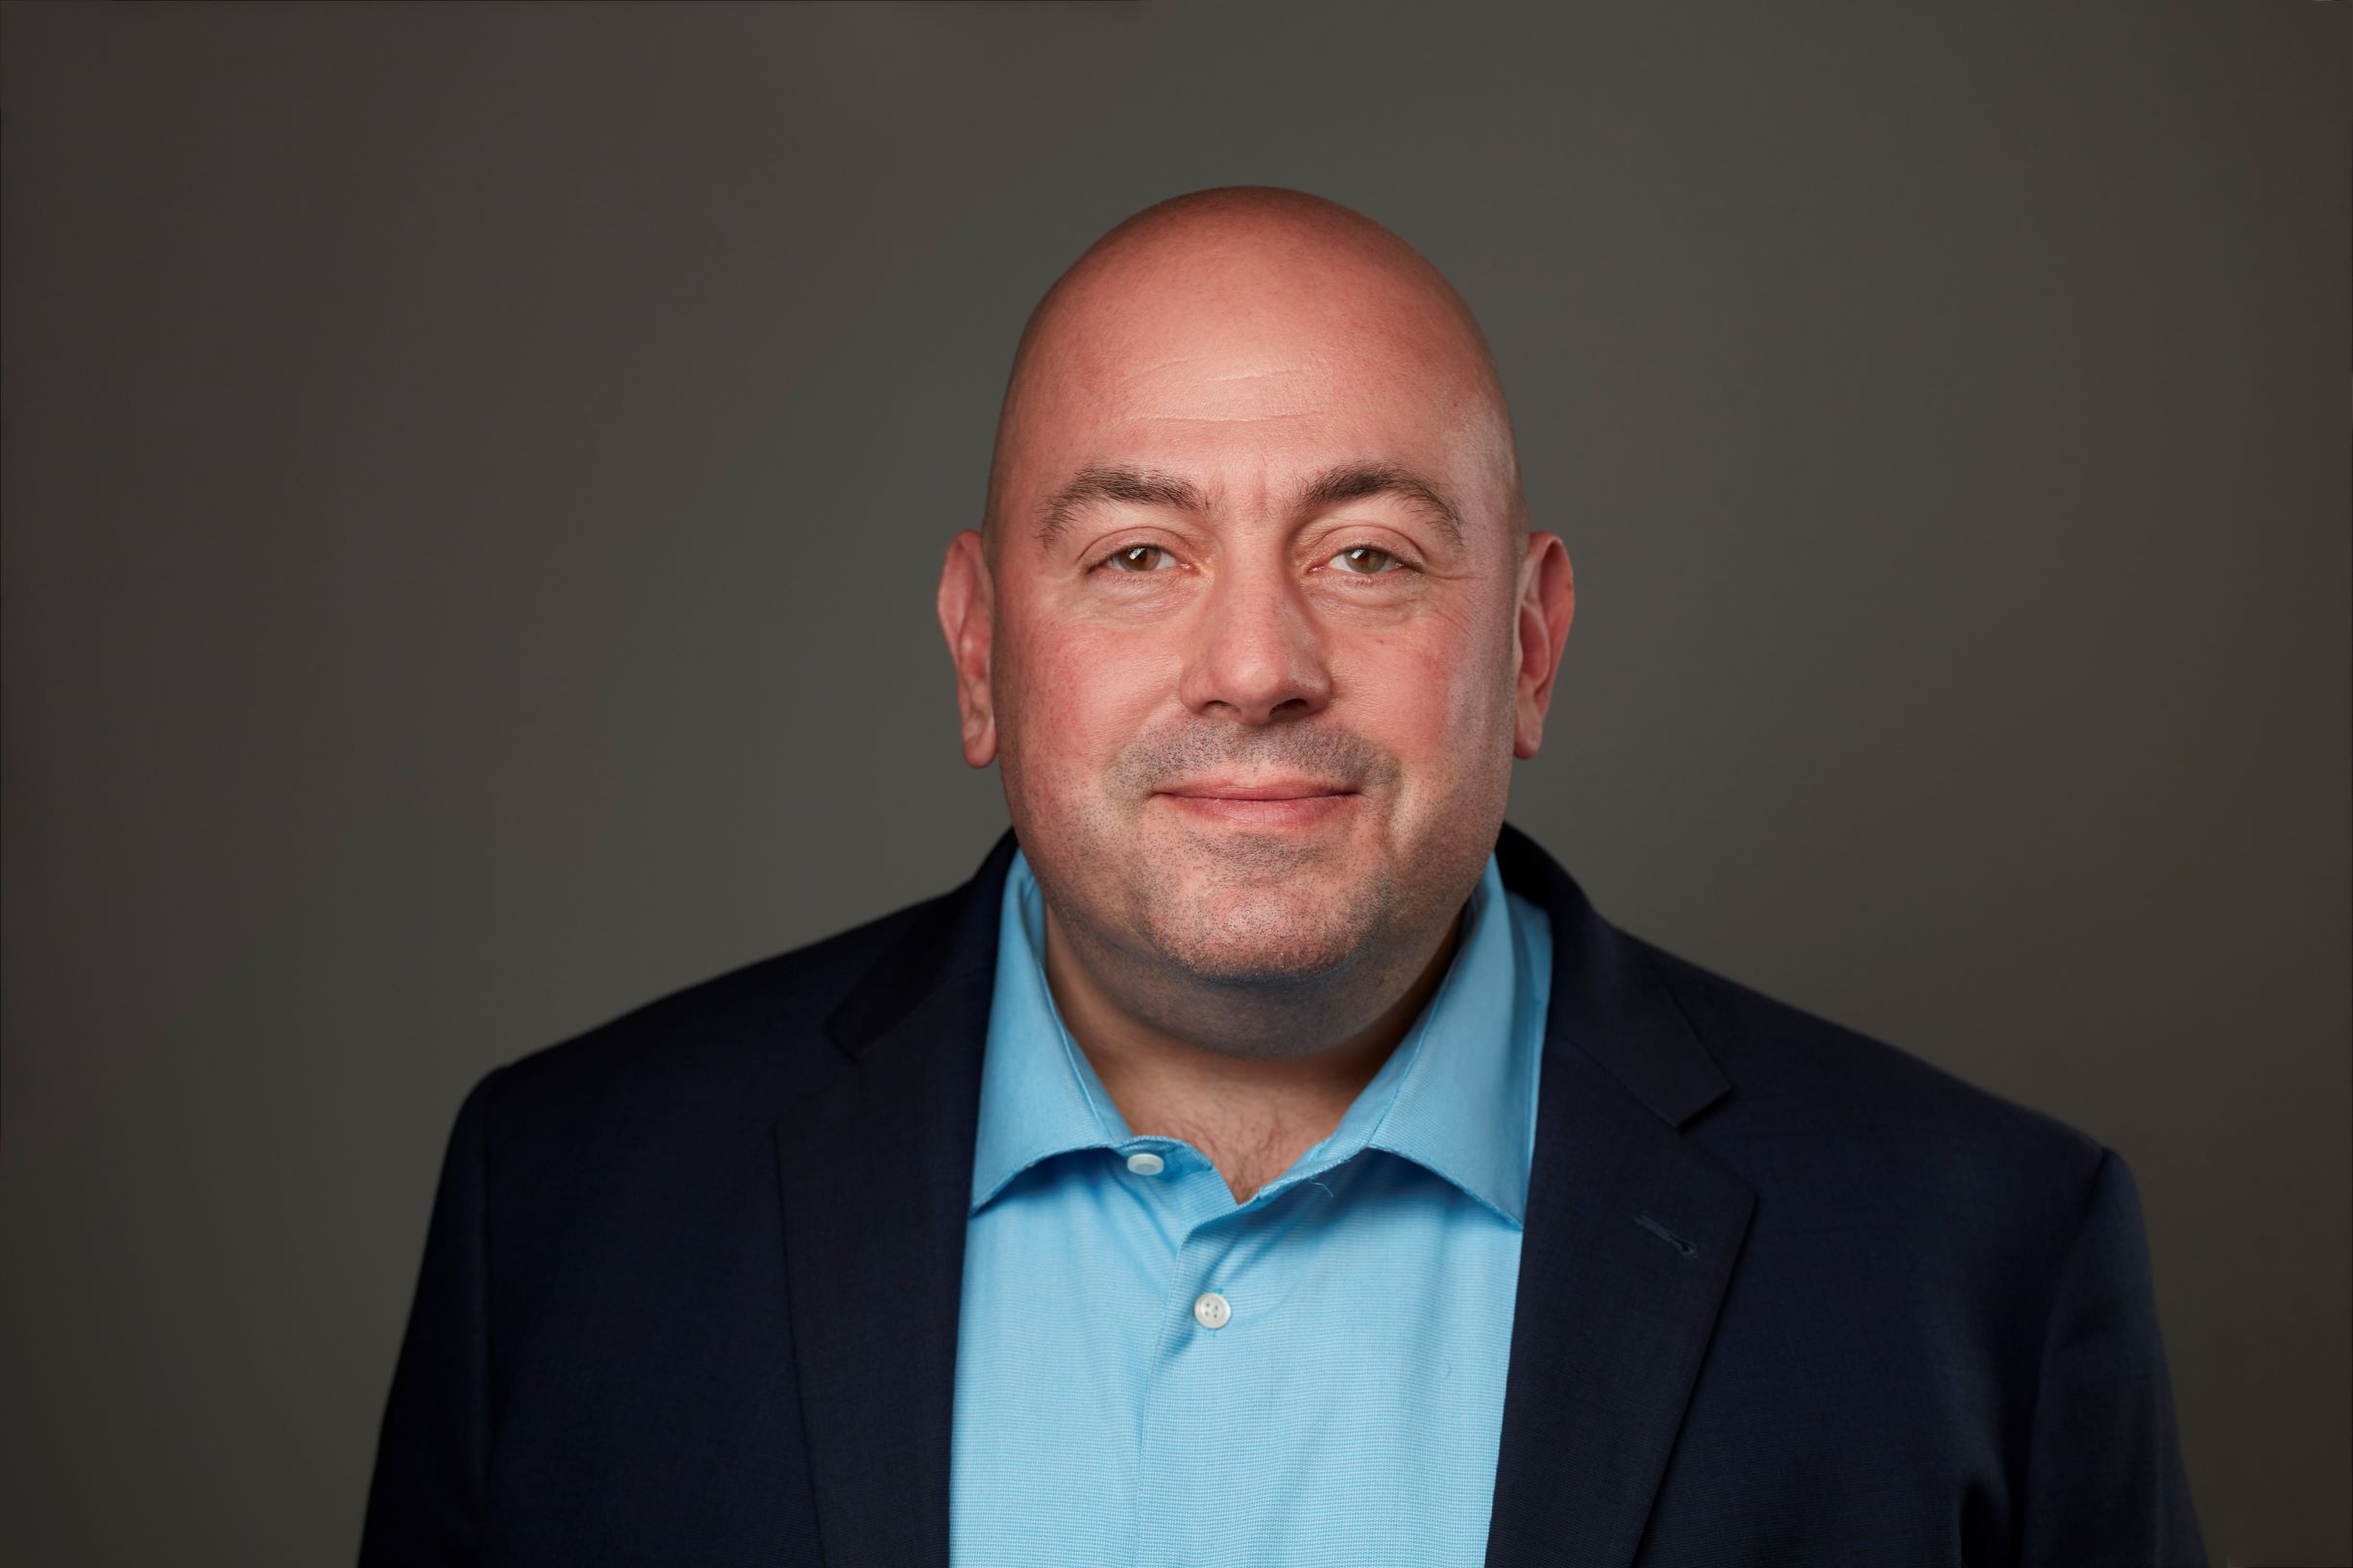 "DASH’s award-winning platform has repeatedly broken the mold, ushering in the era of highly-tailored, fully-transparent routing and execution solutions that the investment community today enjoys. I am extremely excited to be joining DASH’s talented technology team as we work to continue propelling the industry forward.”  - DASH CIO, Steven Bonanno

